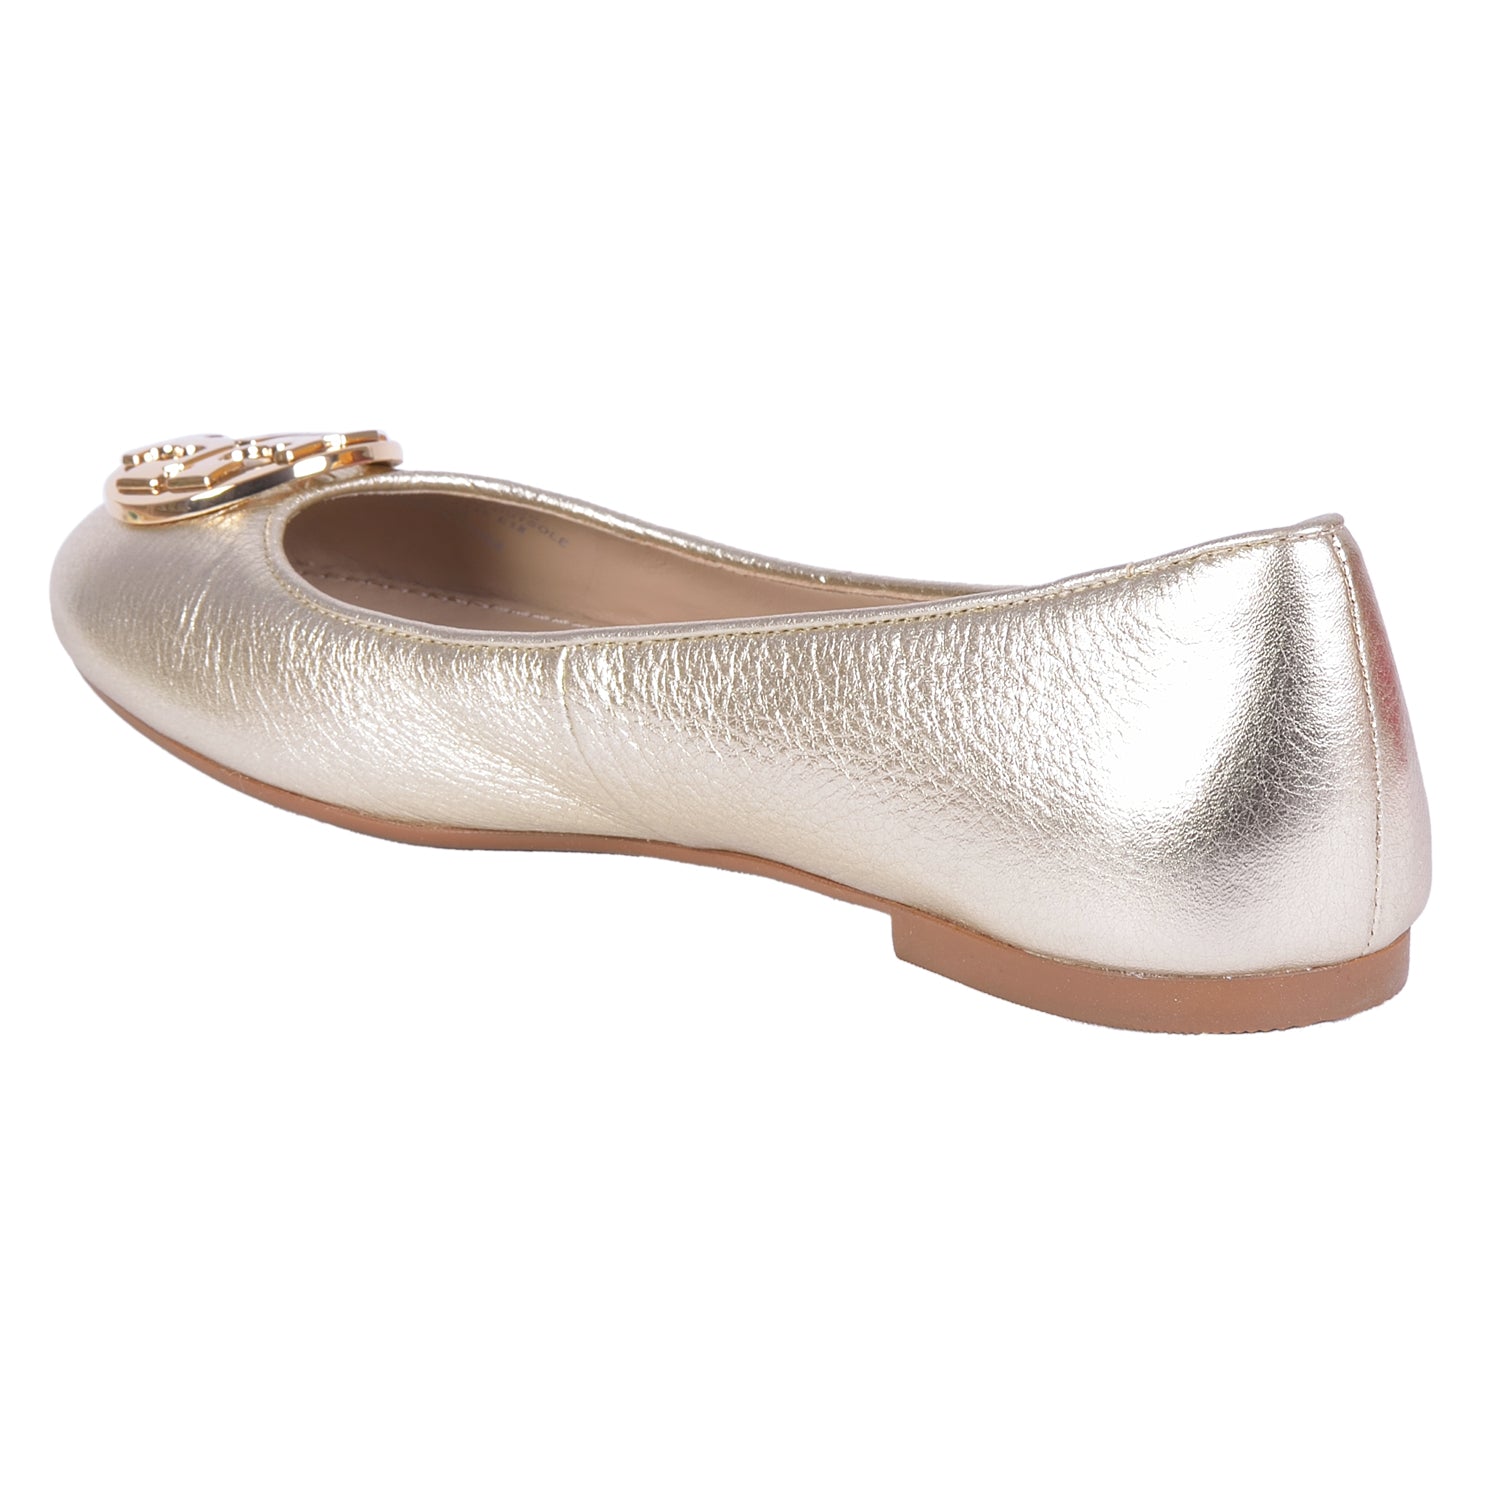 TORY BURCH CLAIRE BALLET TUMBLED LEATHER SPARK GOLD / GOLD